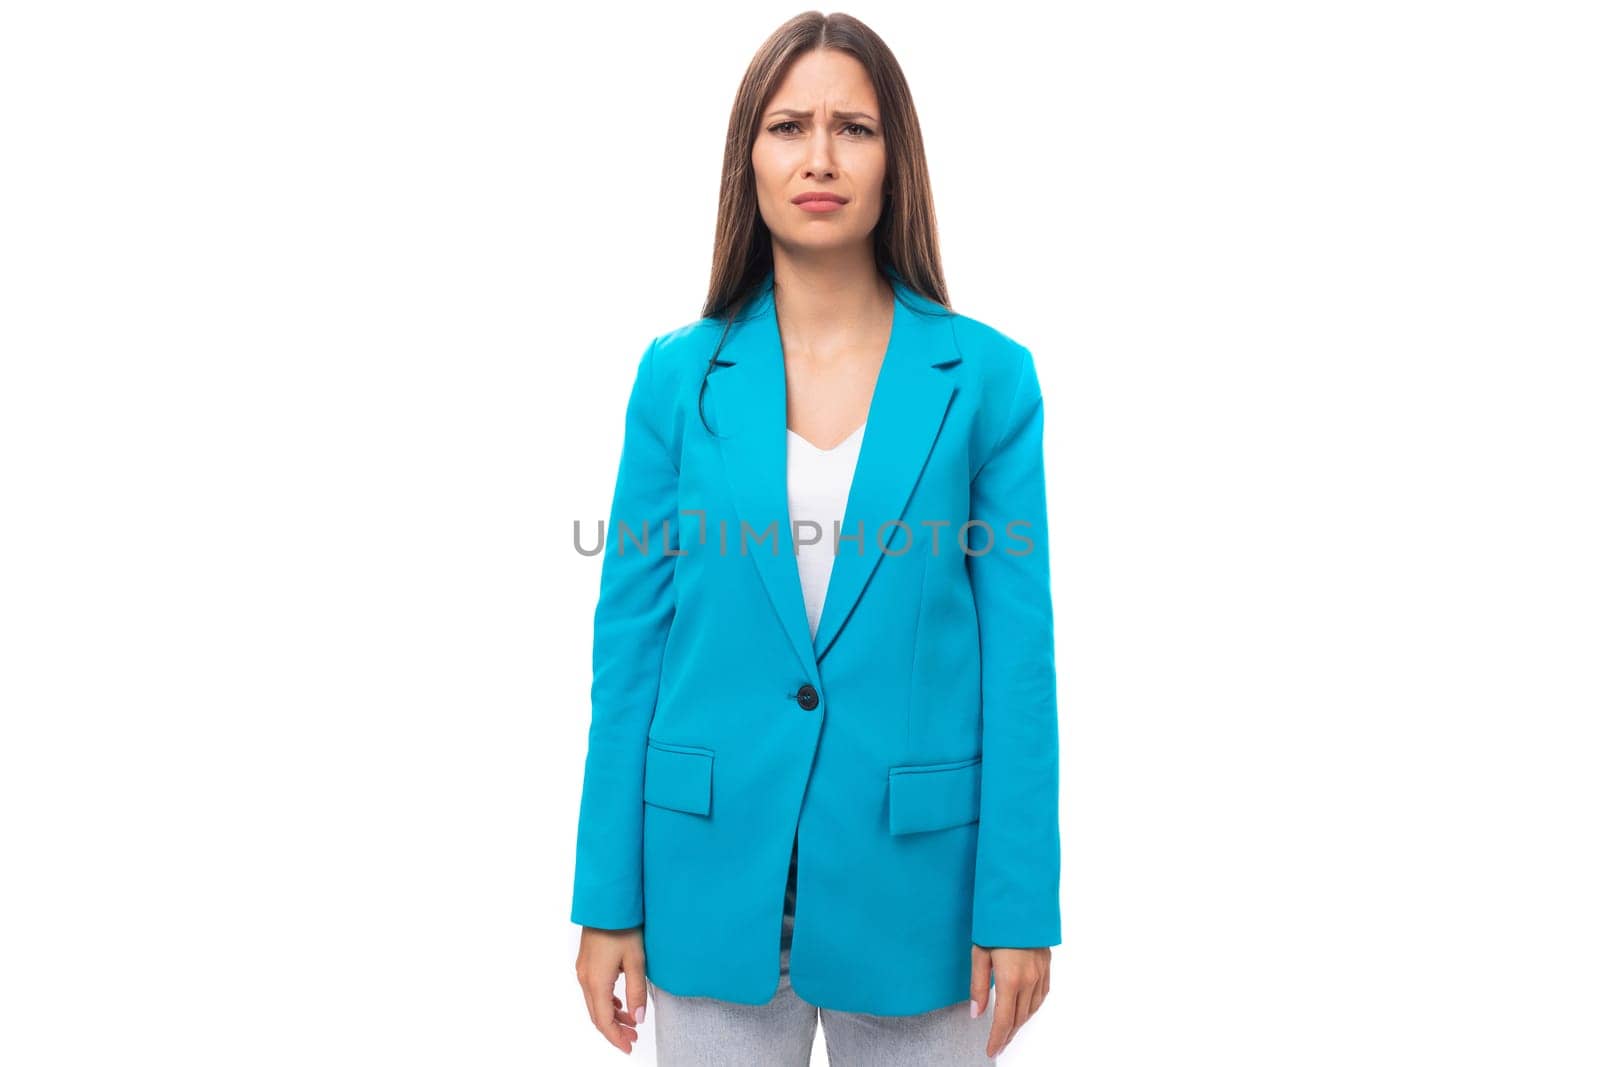 young distressed brunette model woman dressed in a stylish business jacket.